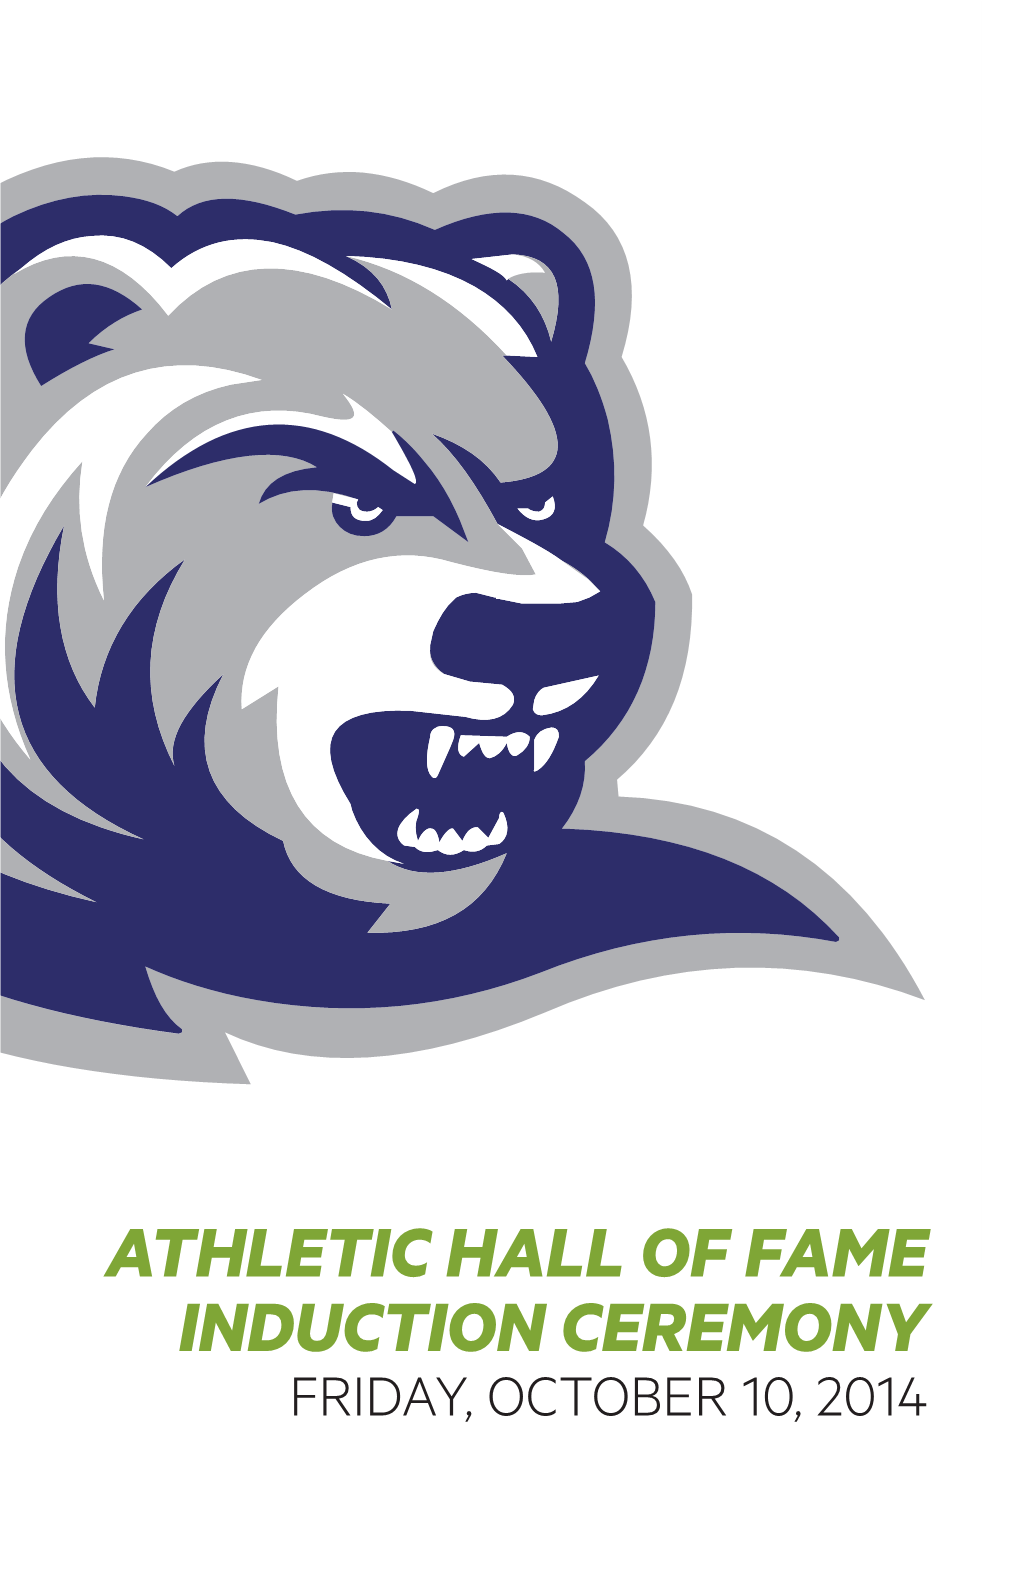 Athletic Hall of Fame Induction Ceremony Friday, October 10, 2014 a Message from the Athletic Director